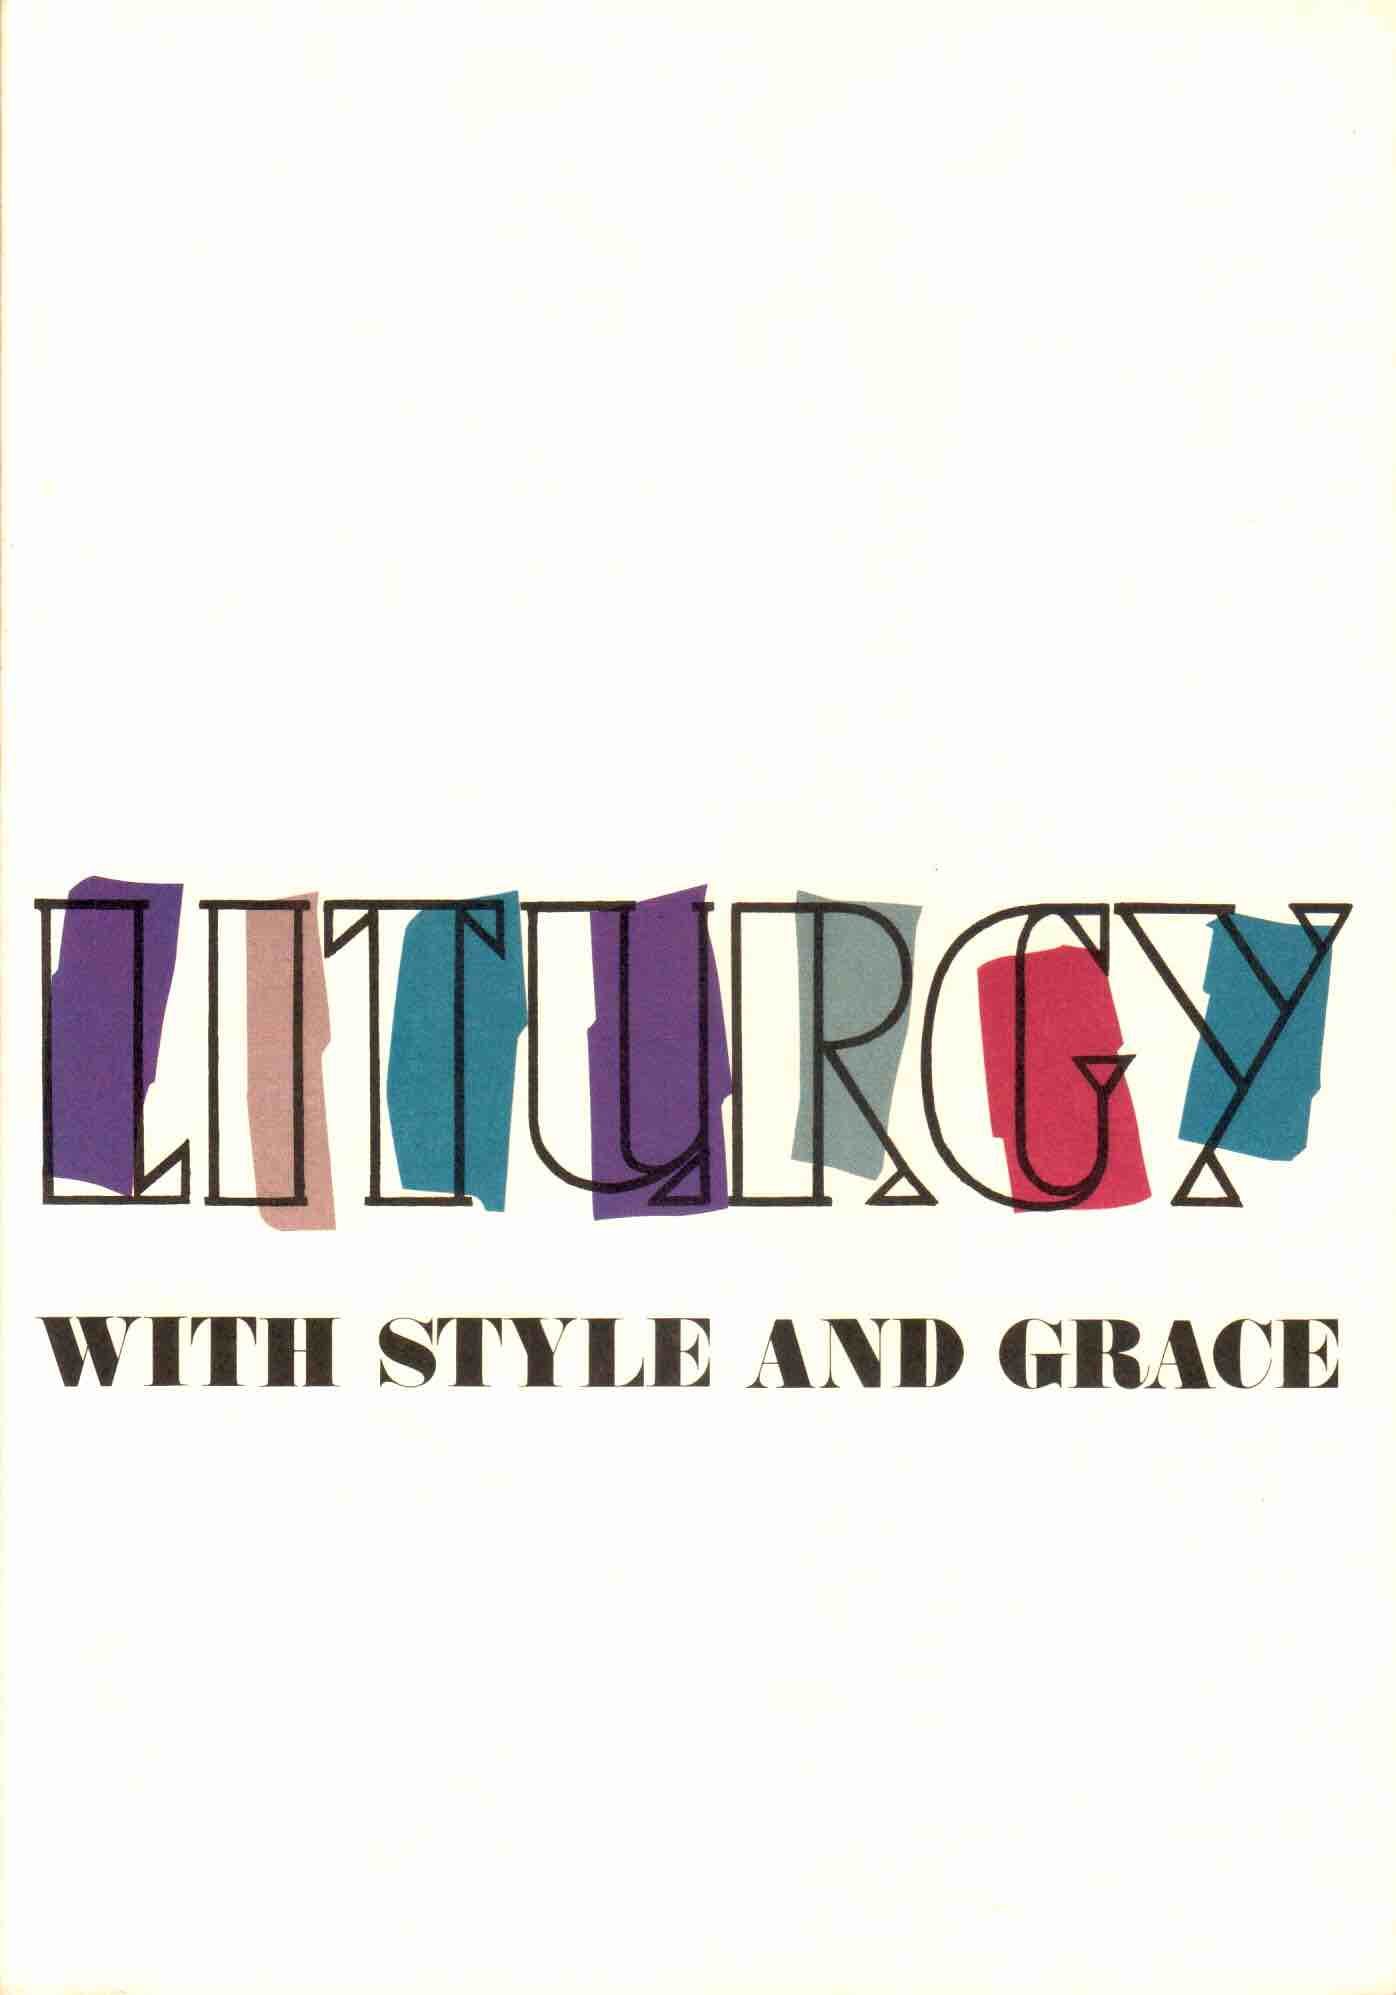 Cover of Liturgy with Style and Grace